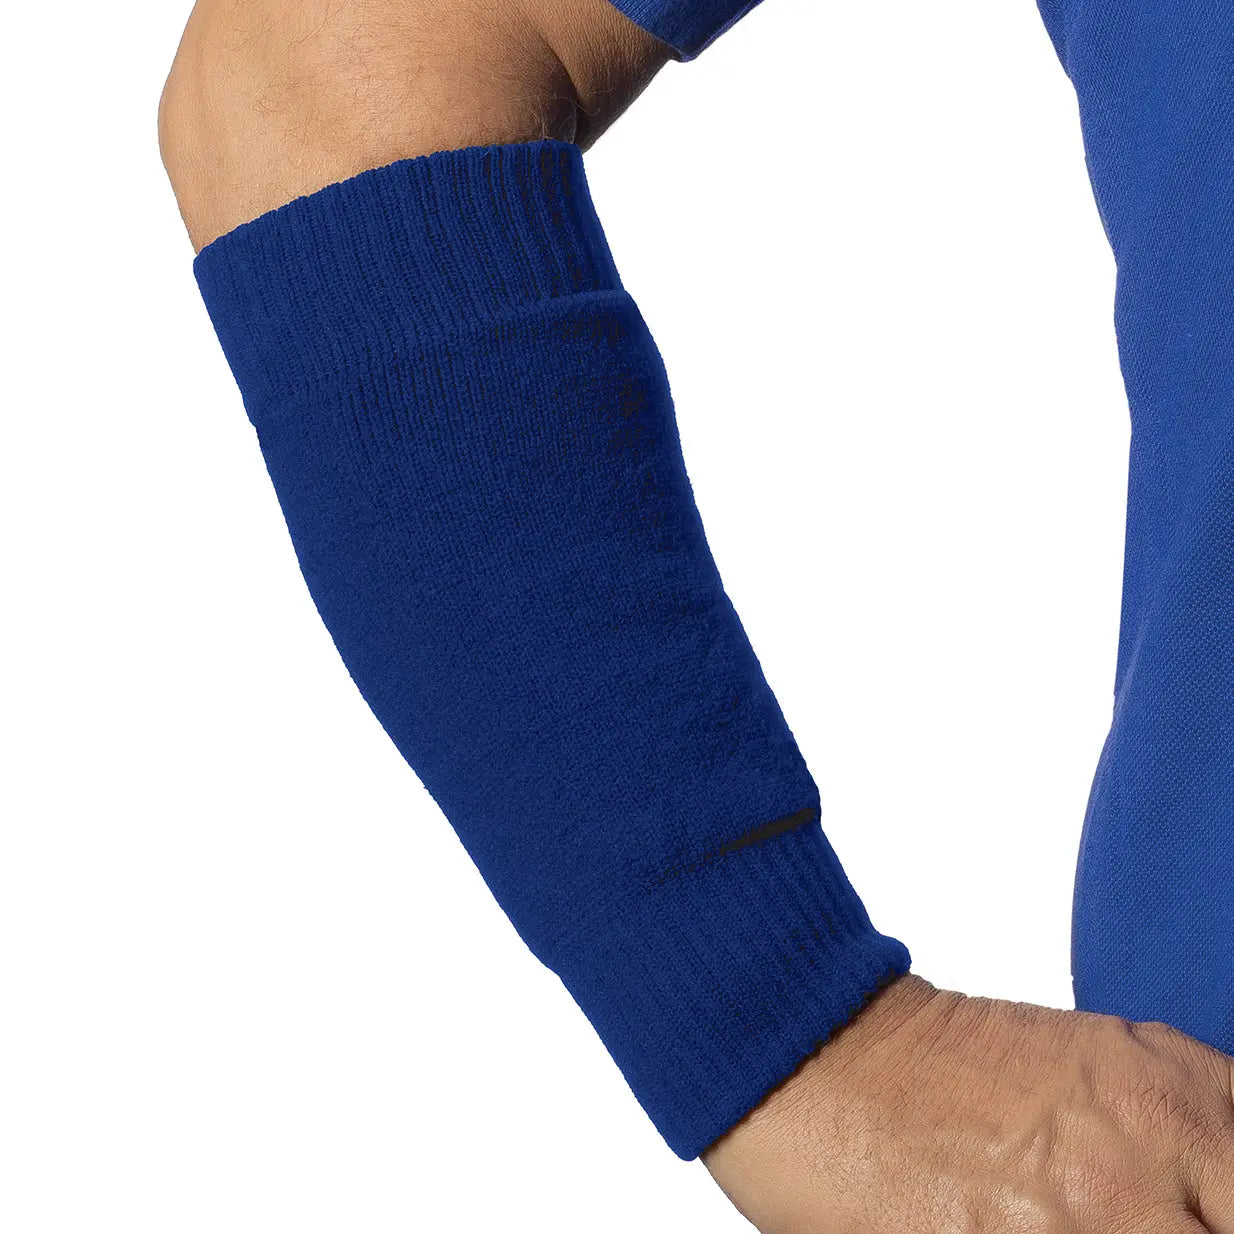 Forearm Sleeves - Light Weight.